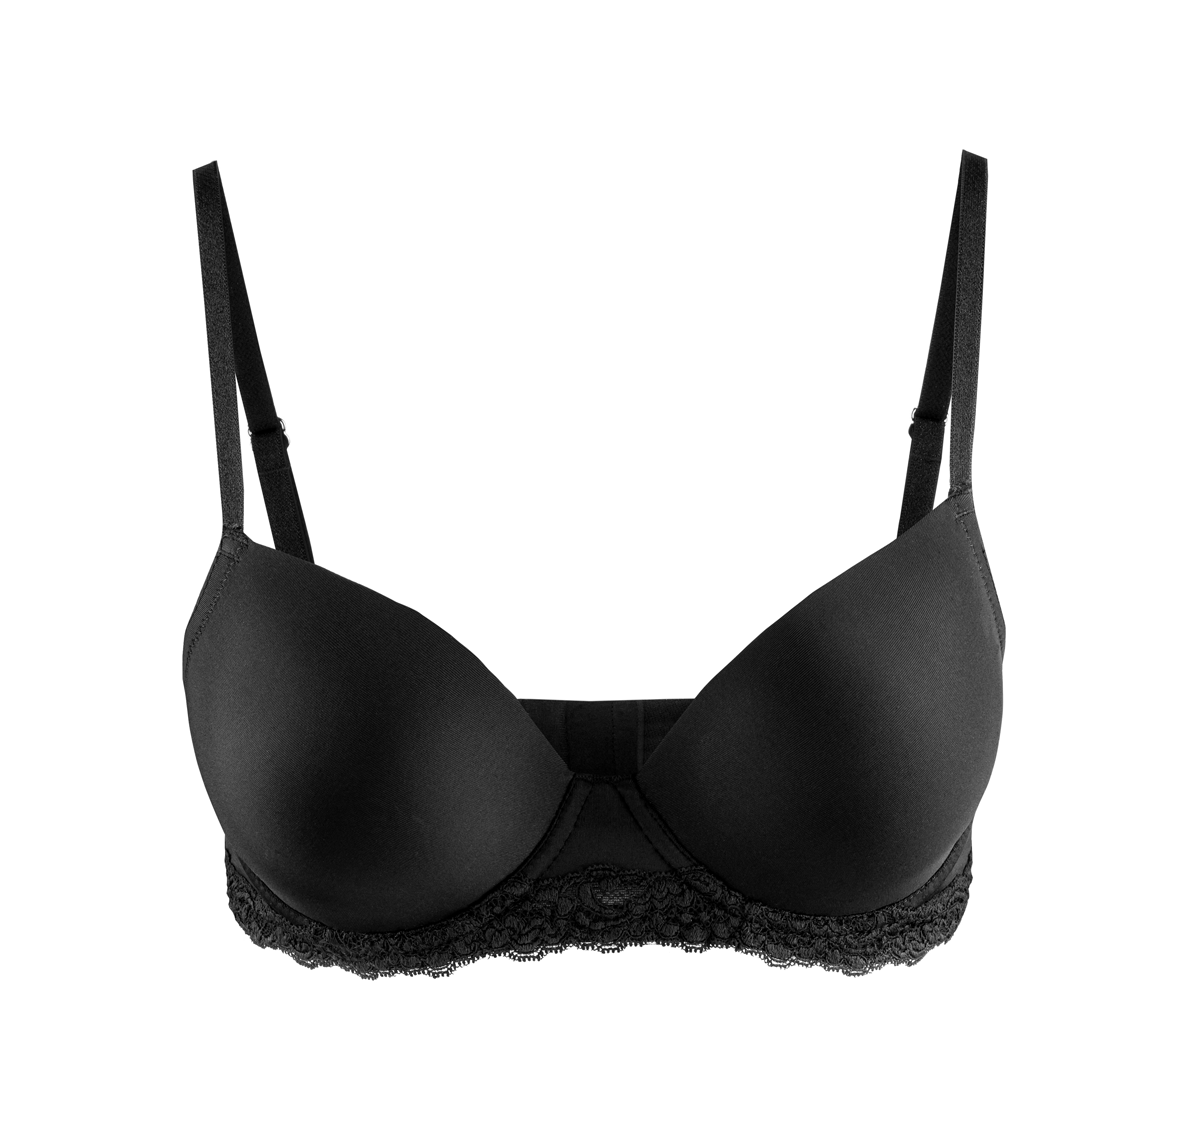 Bra Fitting Expert's Shopping Tips For Women With Asymmetrical Breasts